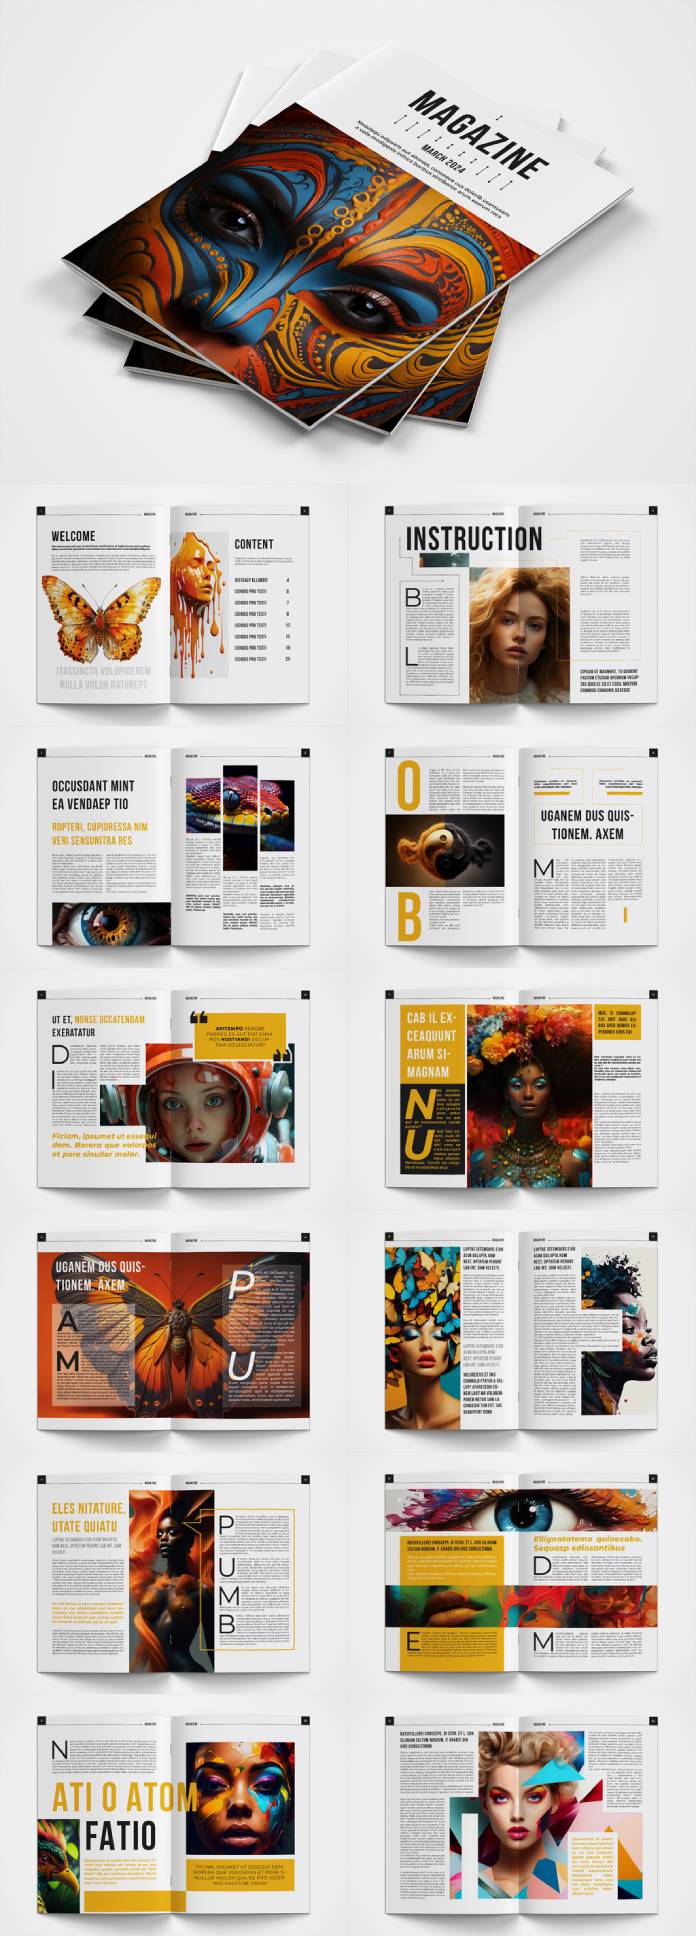 A Professional Magazine Template with Orange Accents by Grkic Creative